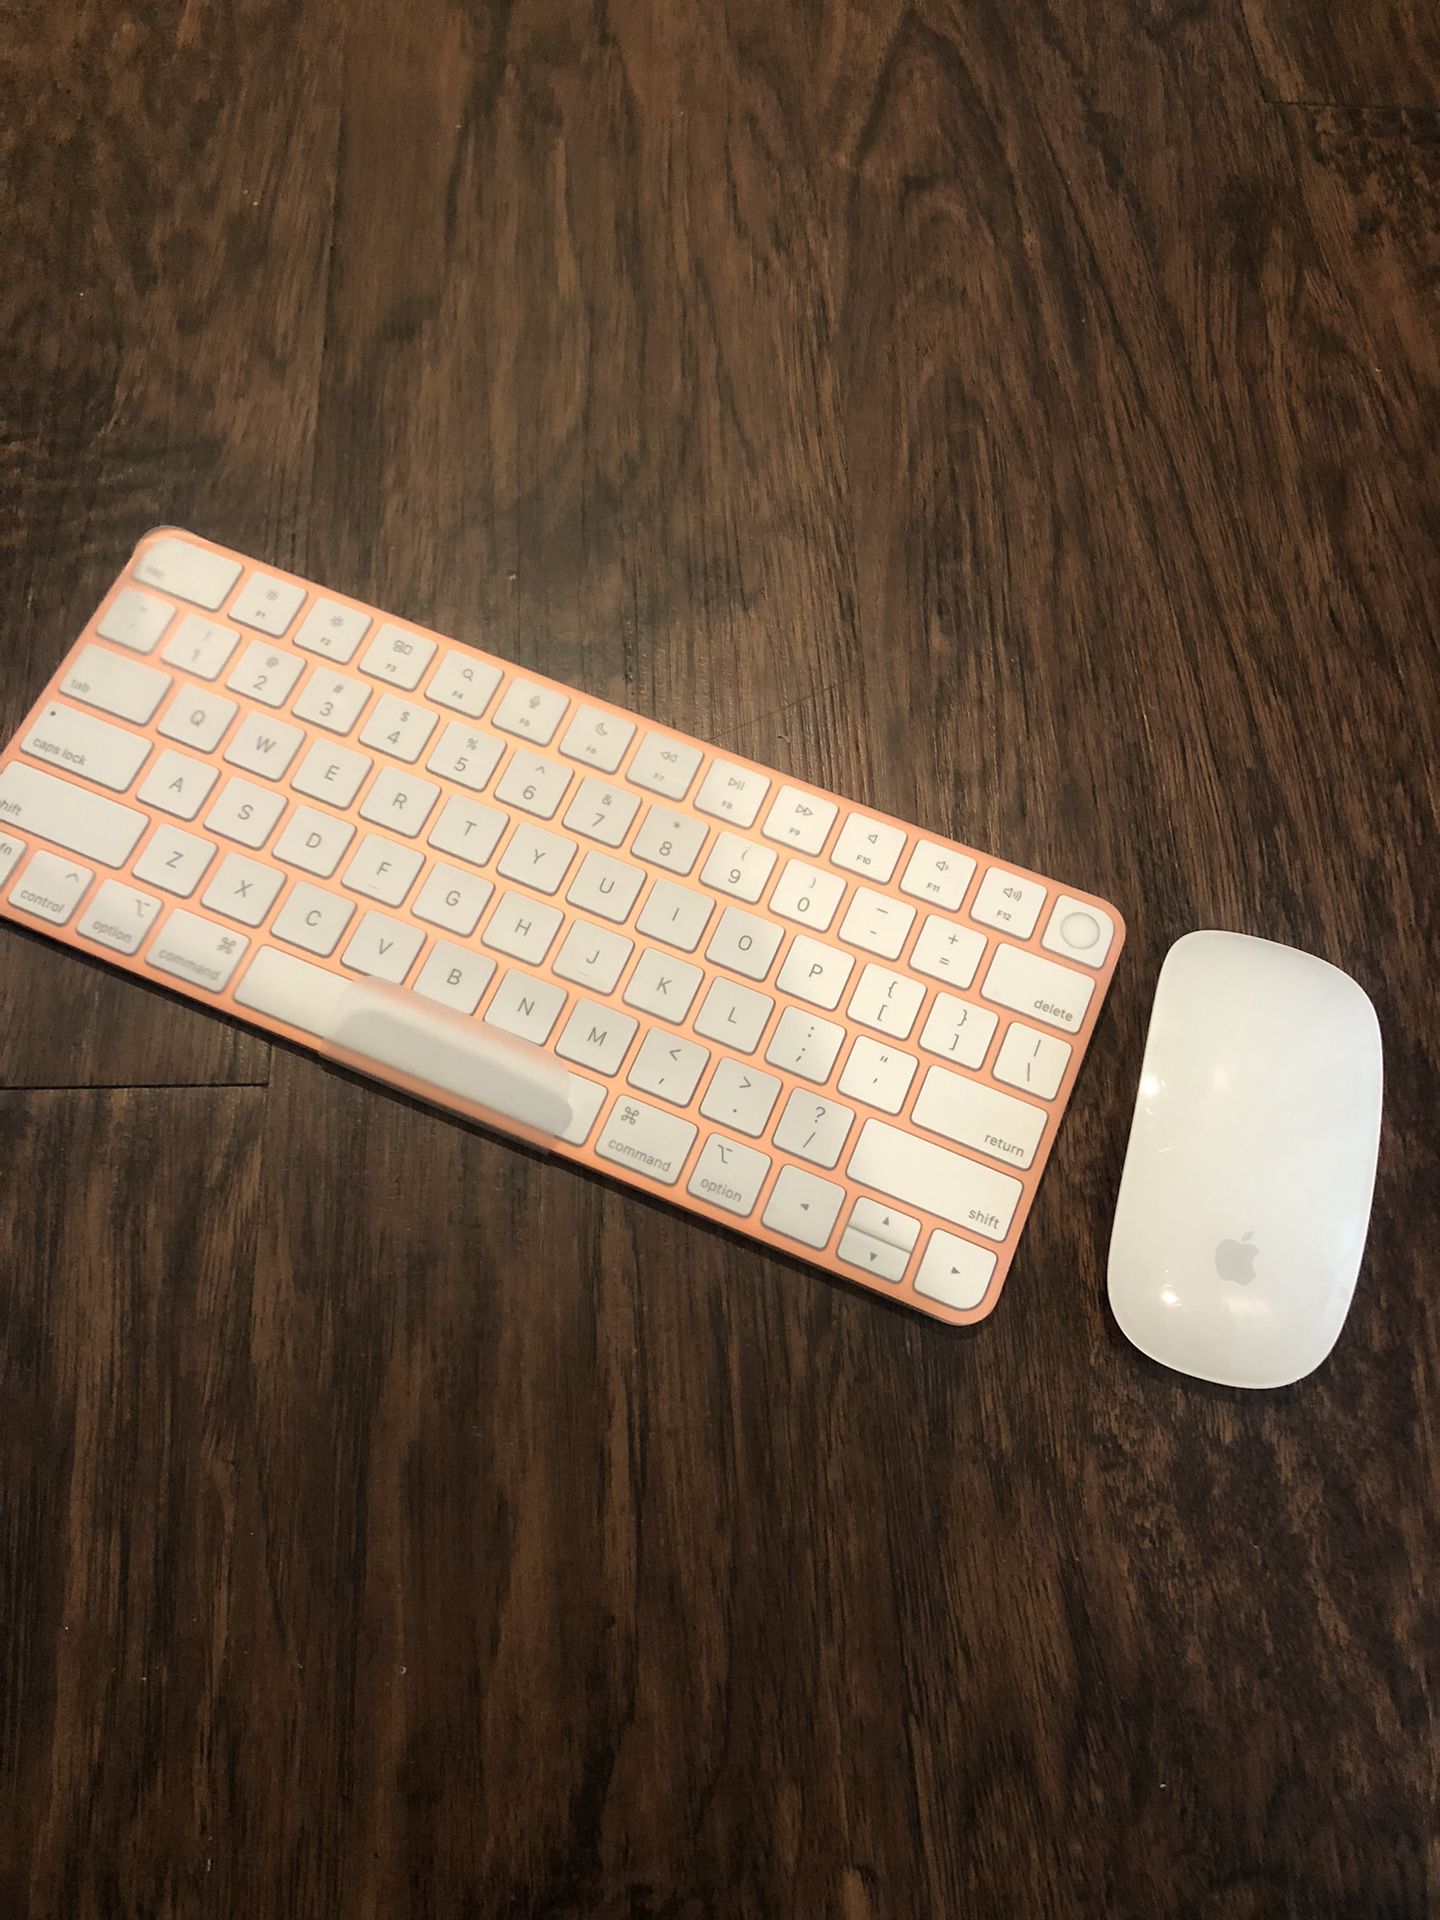 Color Orange 🍊 Apple 🍎 Magic Keyboard with Touch ID and Magic Mouse: Wireless, Bluetooth, Rechargeable 💲125 FOR BOTH NO LESS PICK UP ONLY NO TRADE 